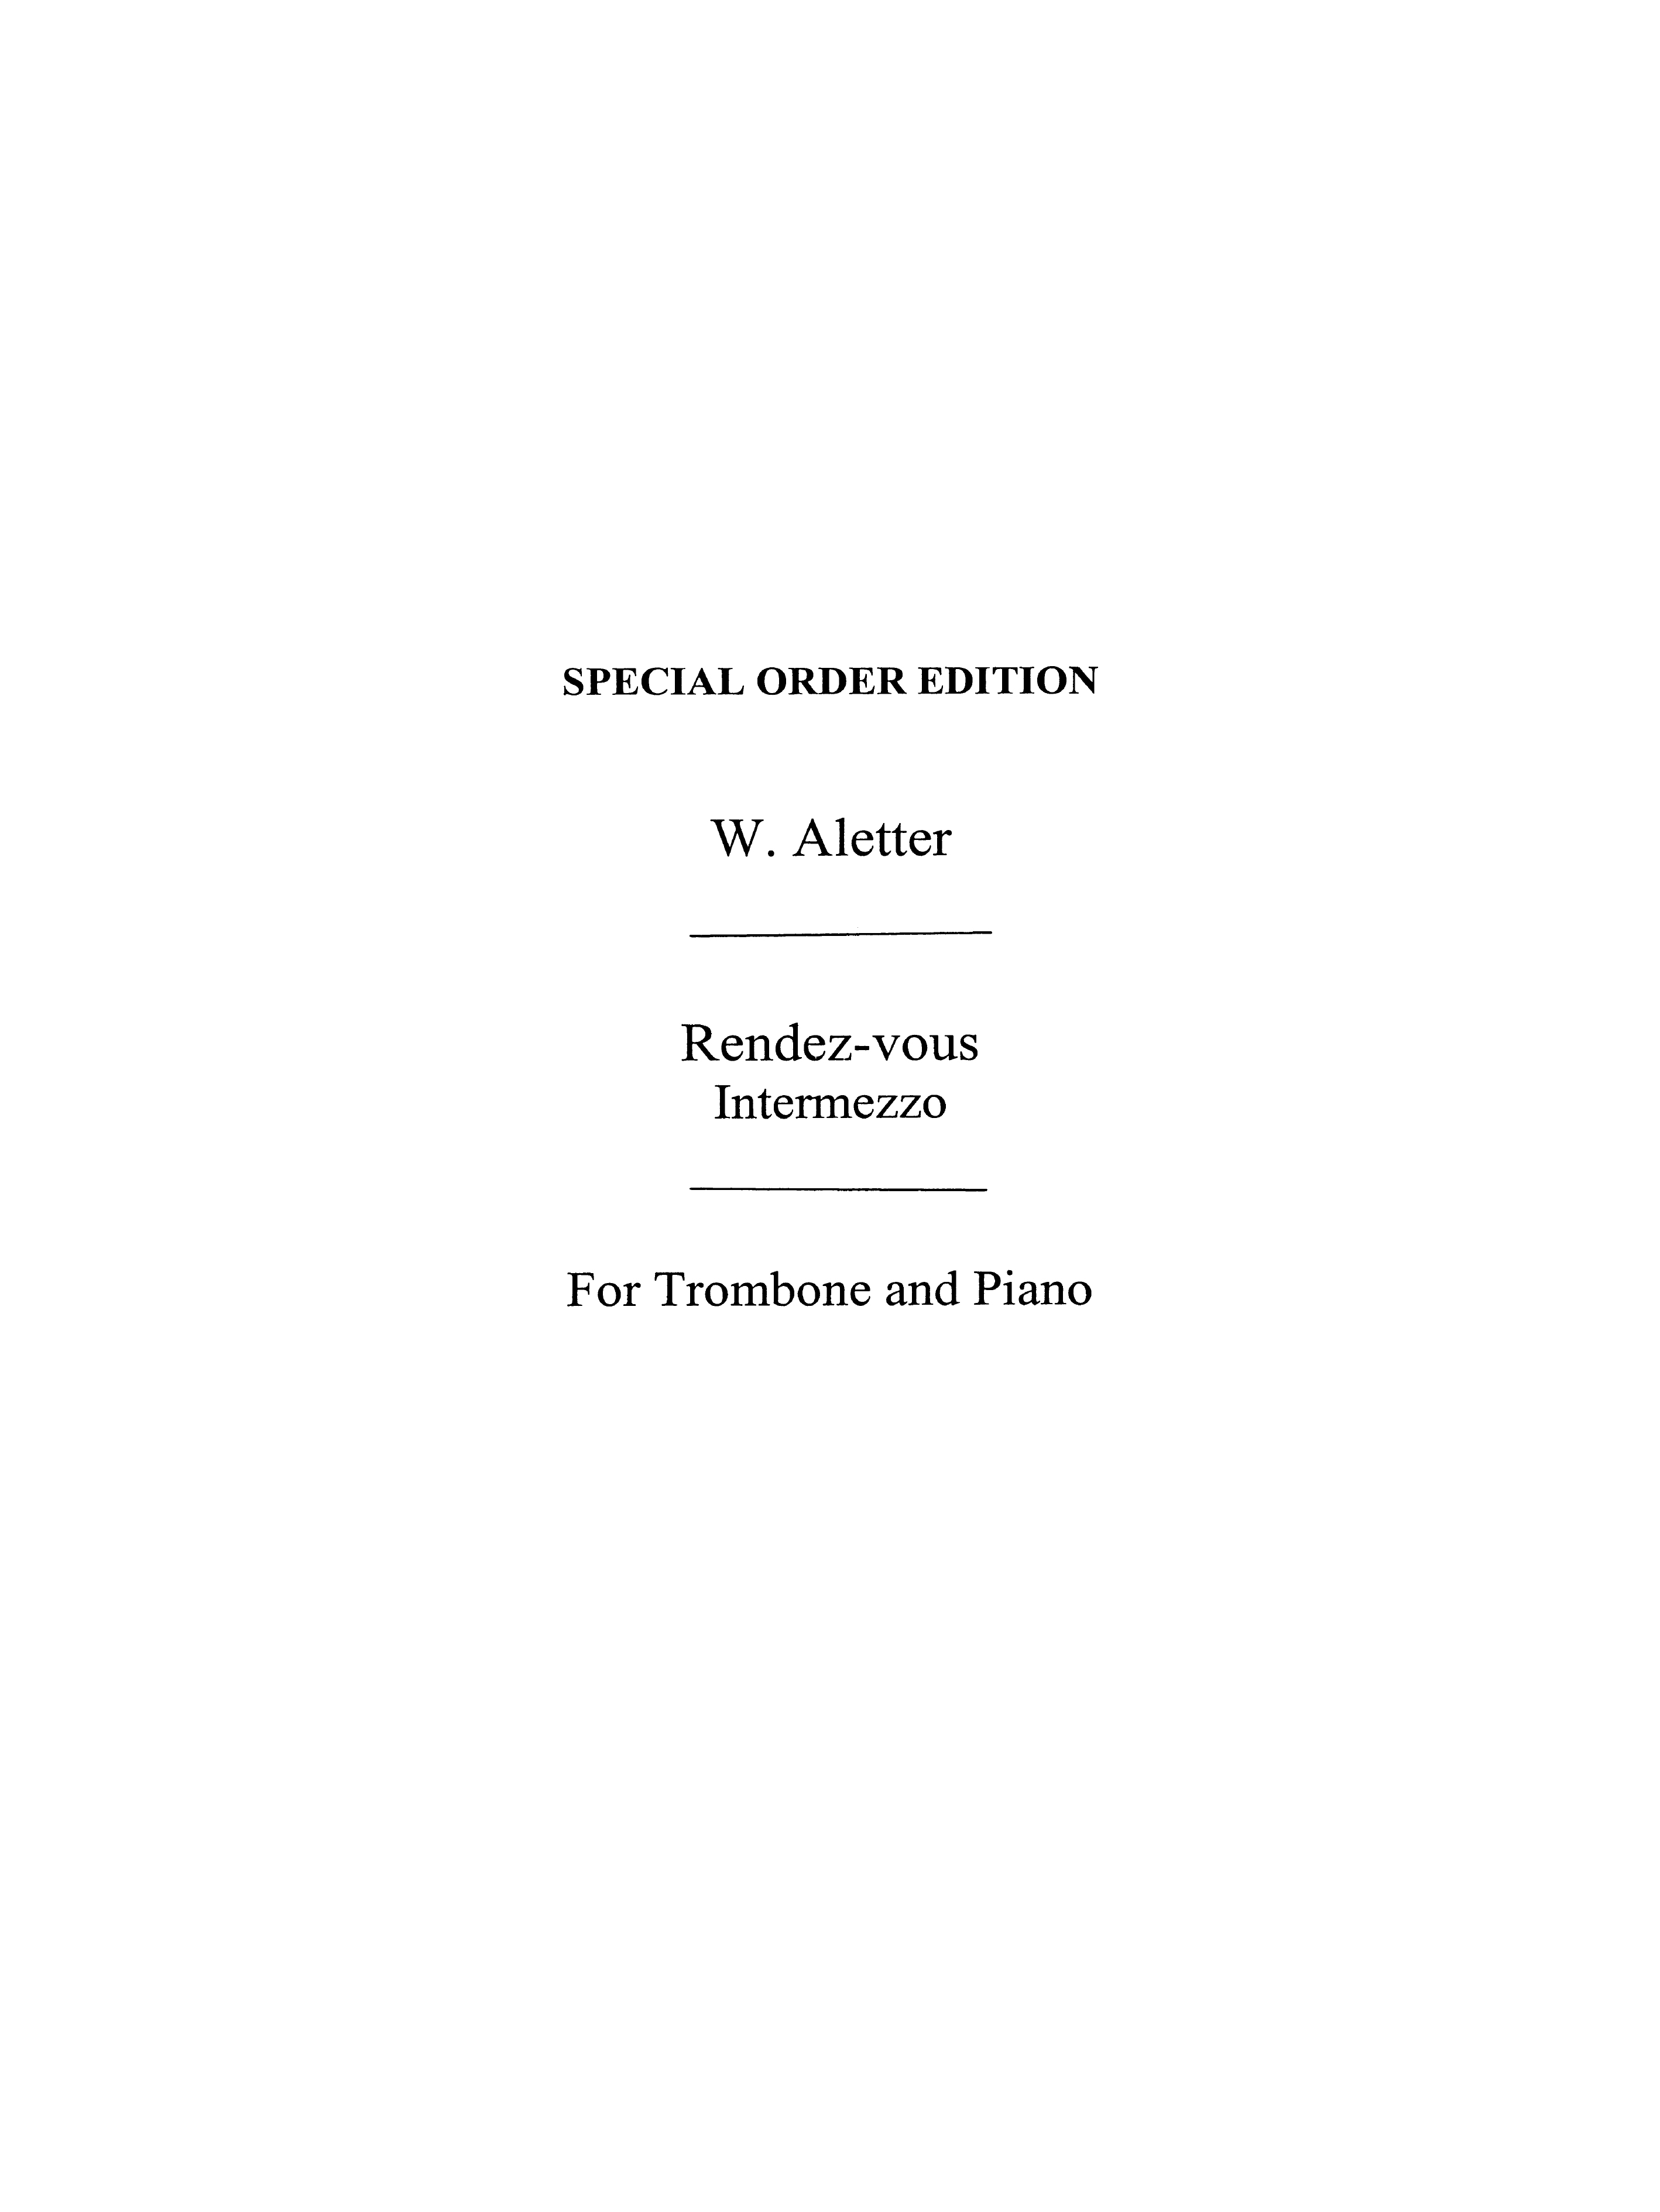 W. Aletter: Rendezvous for Trombone and Piano